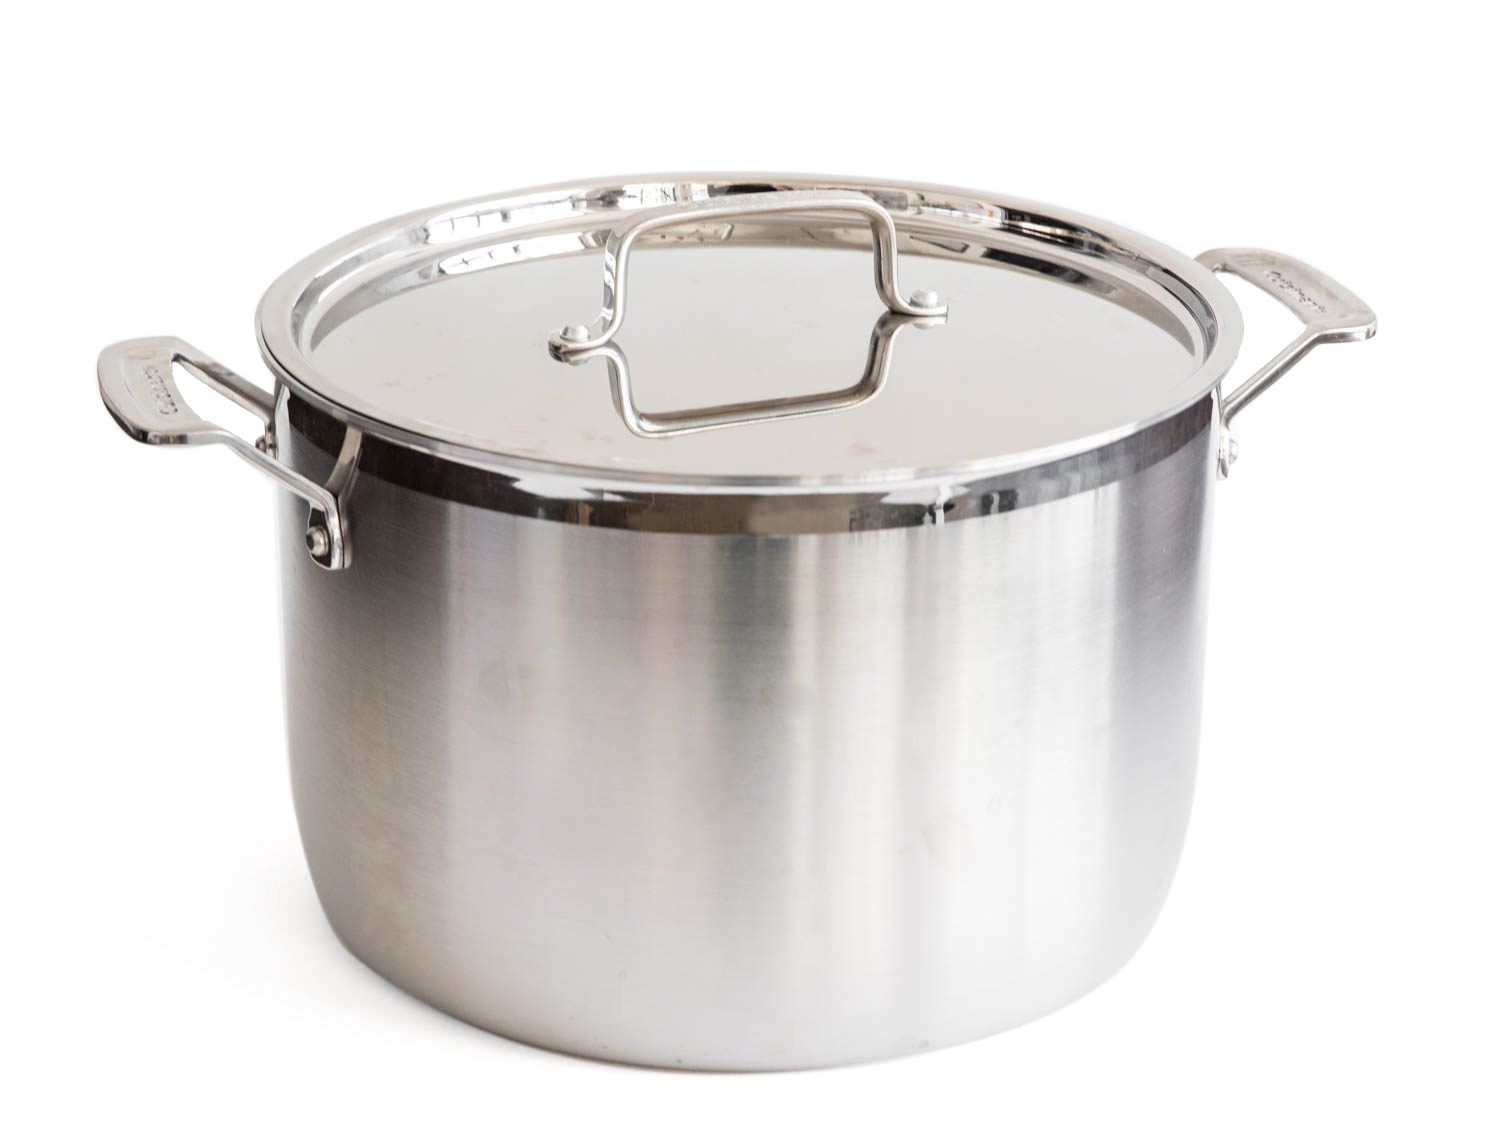 We Tested 16 Stockpots—Here Are Our Favorites